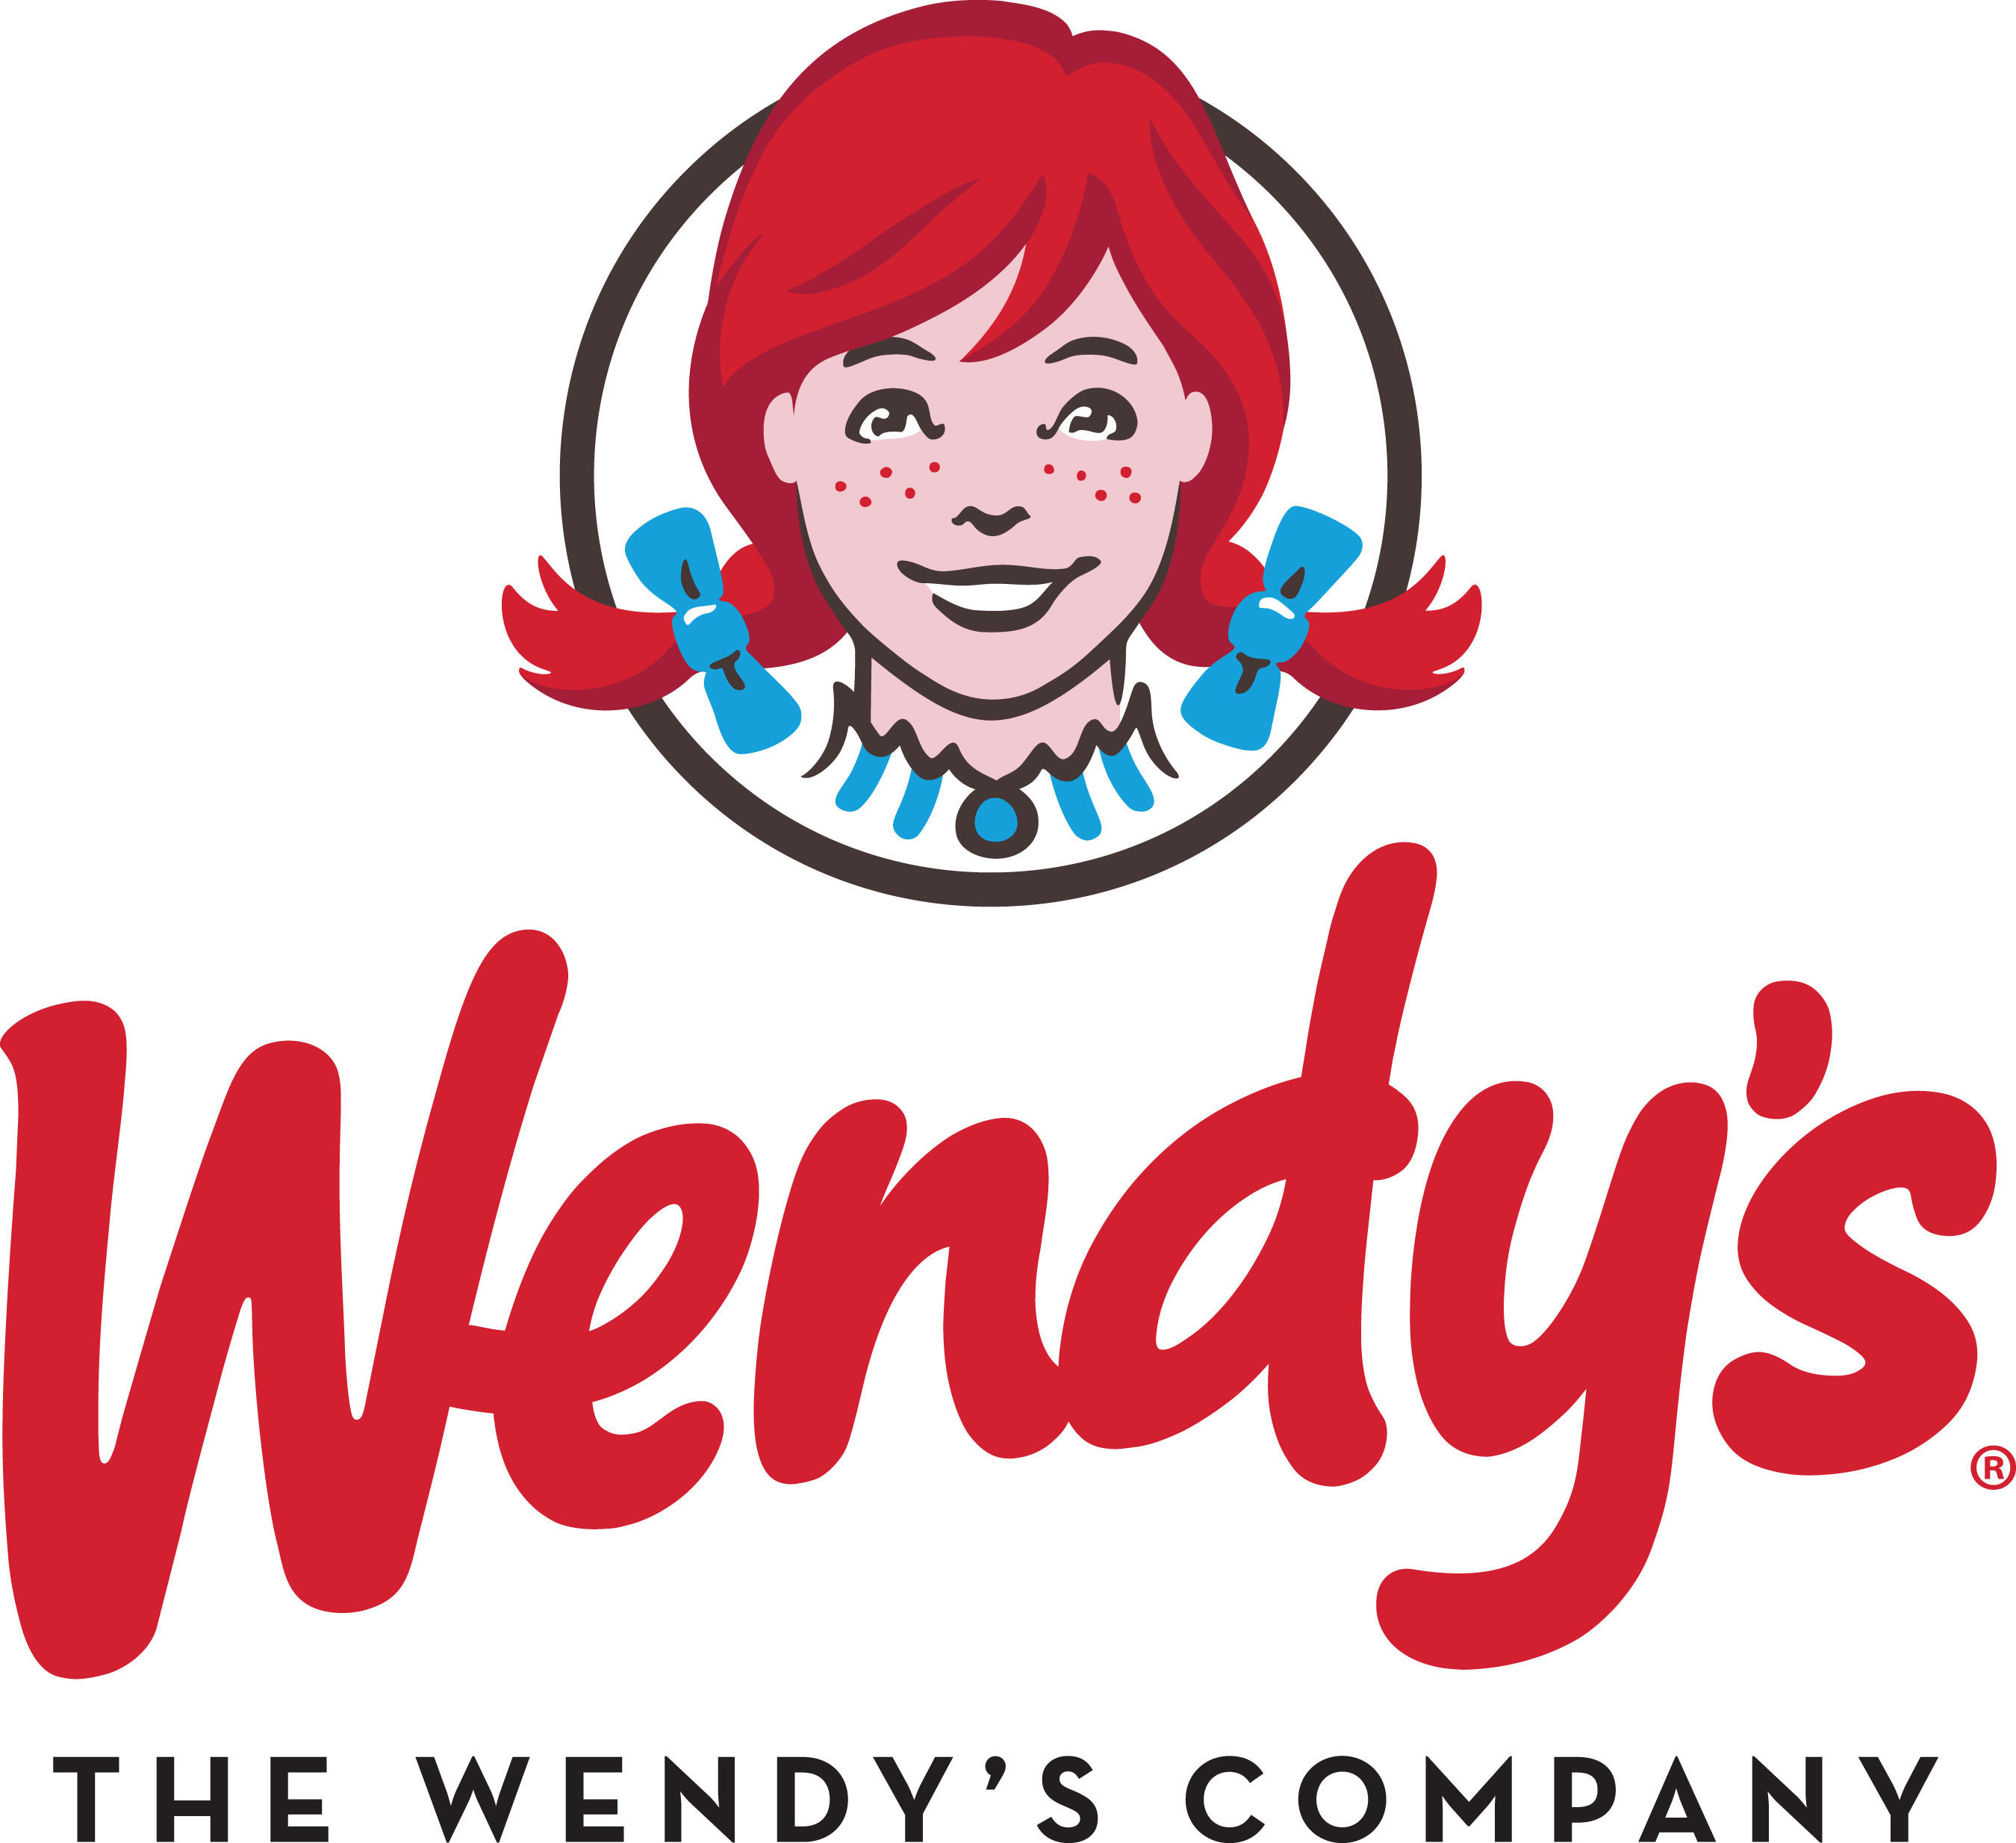 The Wendy's Company is the world's third largest quick-service hamburger company. The Wendy's system includes more than 6,500 franchise and Company restaurants in the United States and 27 countries and U.S. territories worldwide. For more information, visit aboutwendys.com or wendys.com.